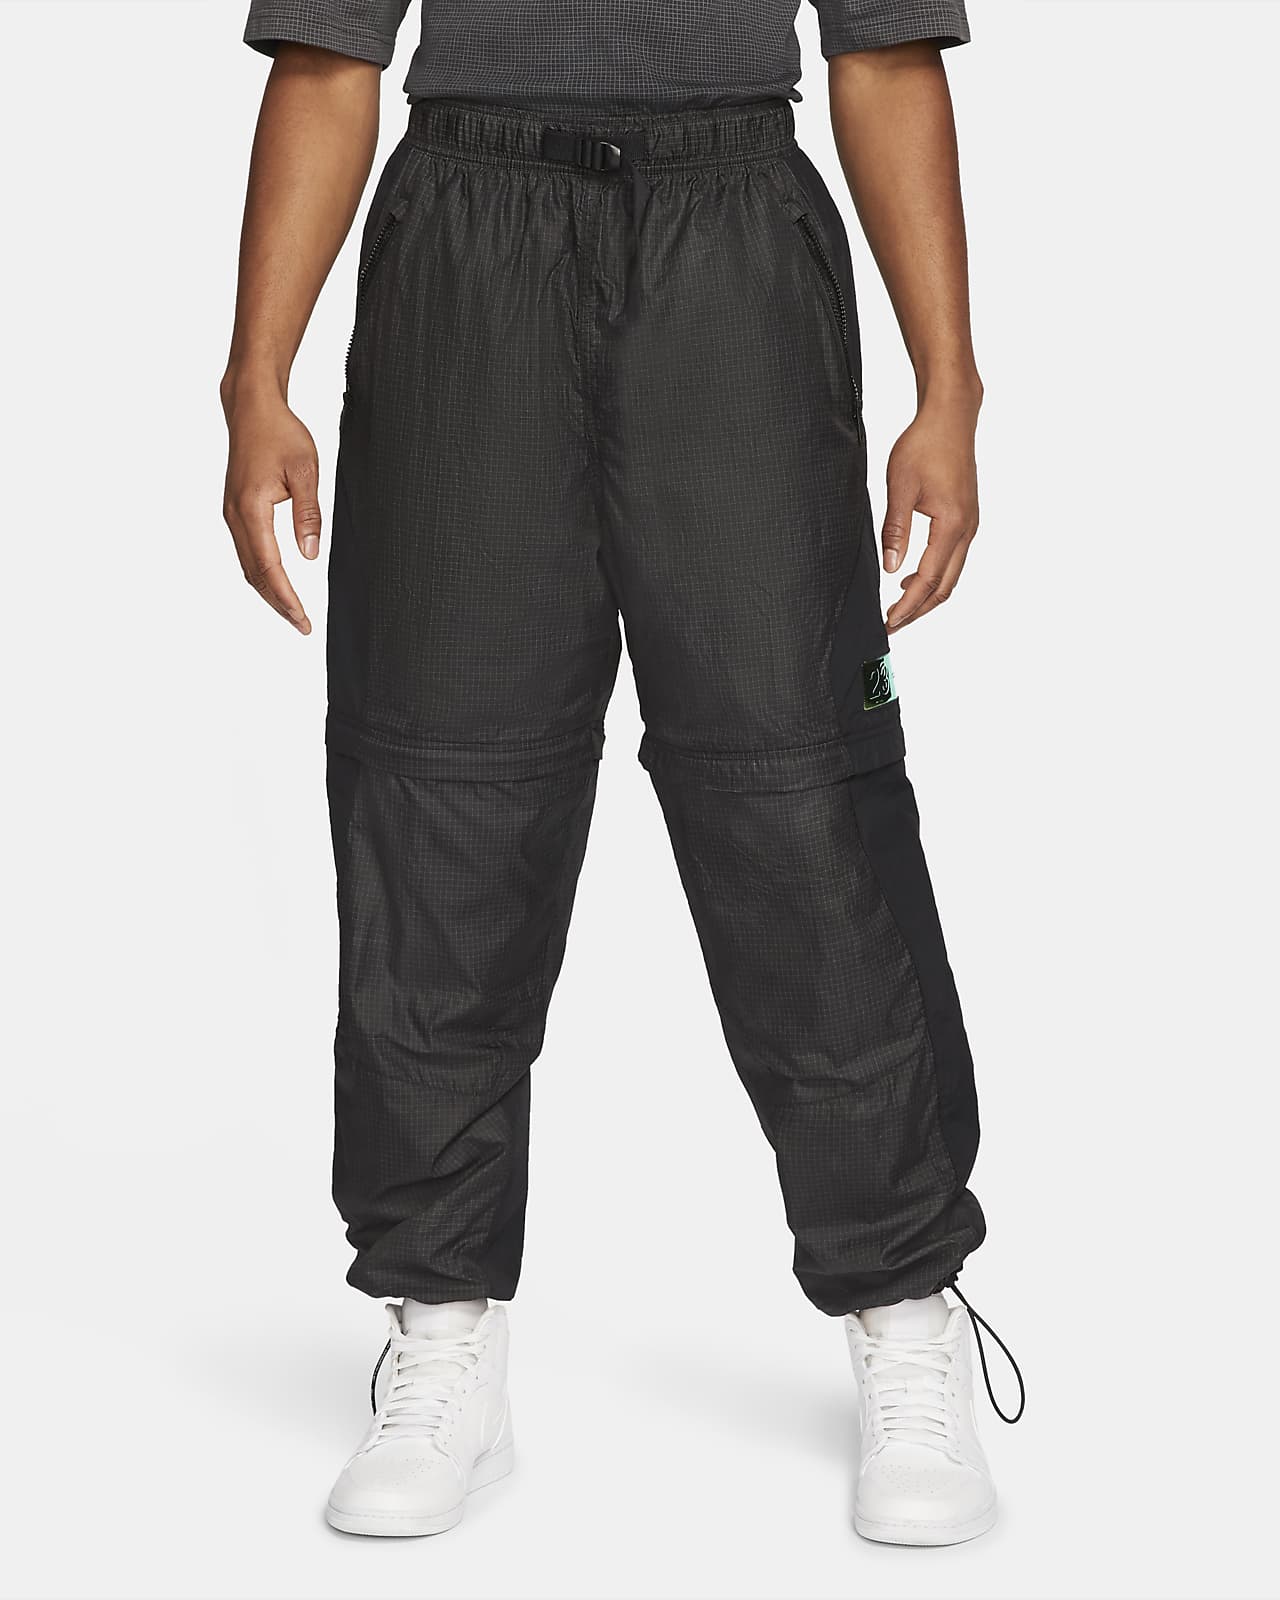 Convertible Tracksuit Bottoms. Nike 